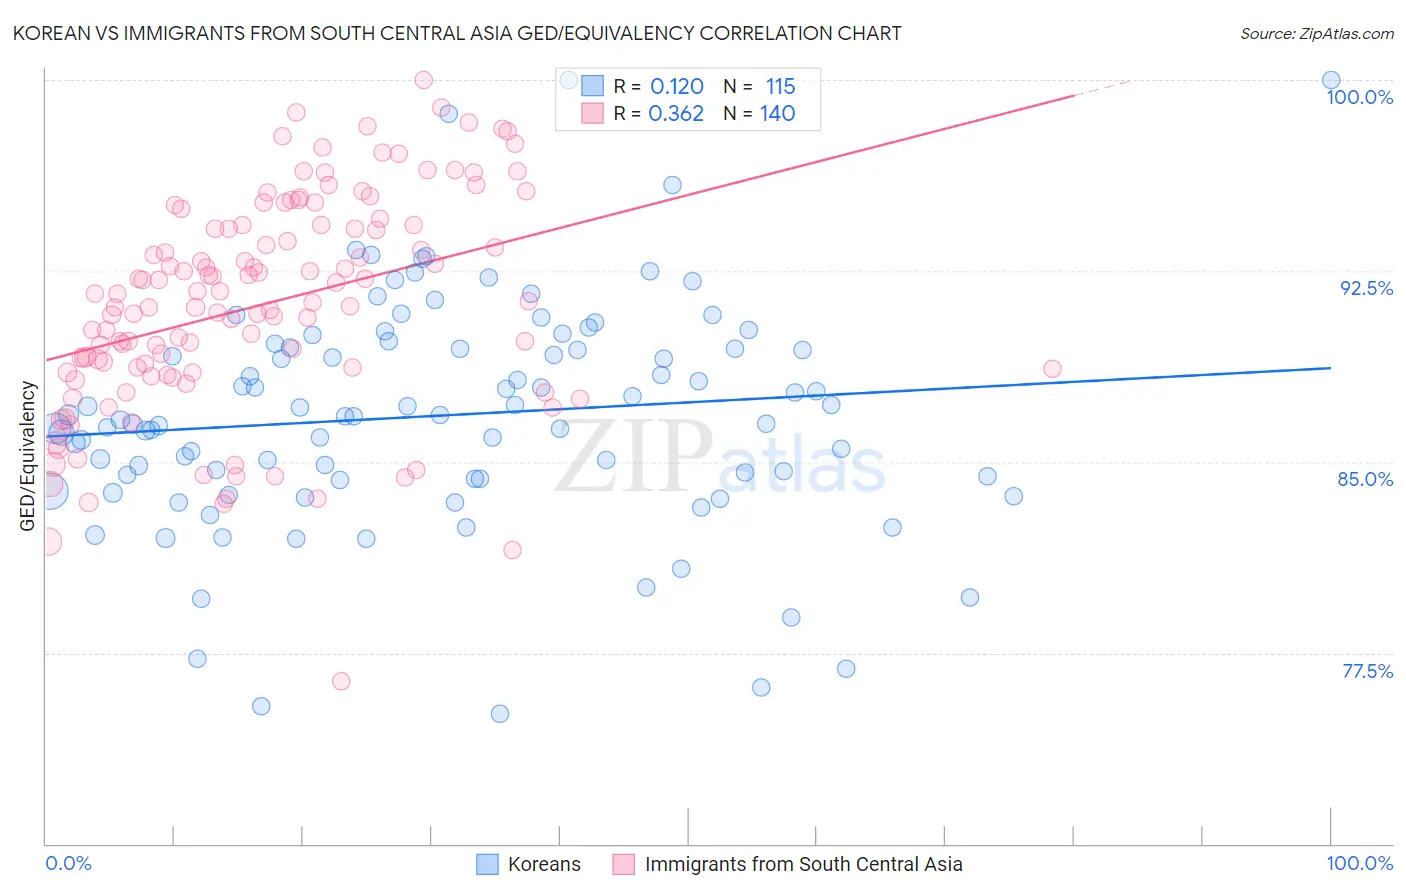 Korean vs Immigrants from South Central Asia GED/Equivalency